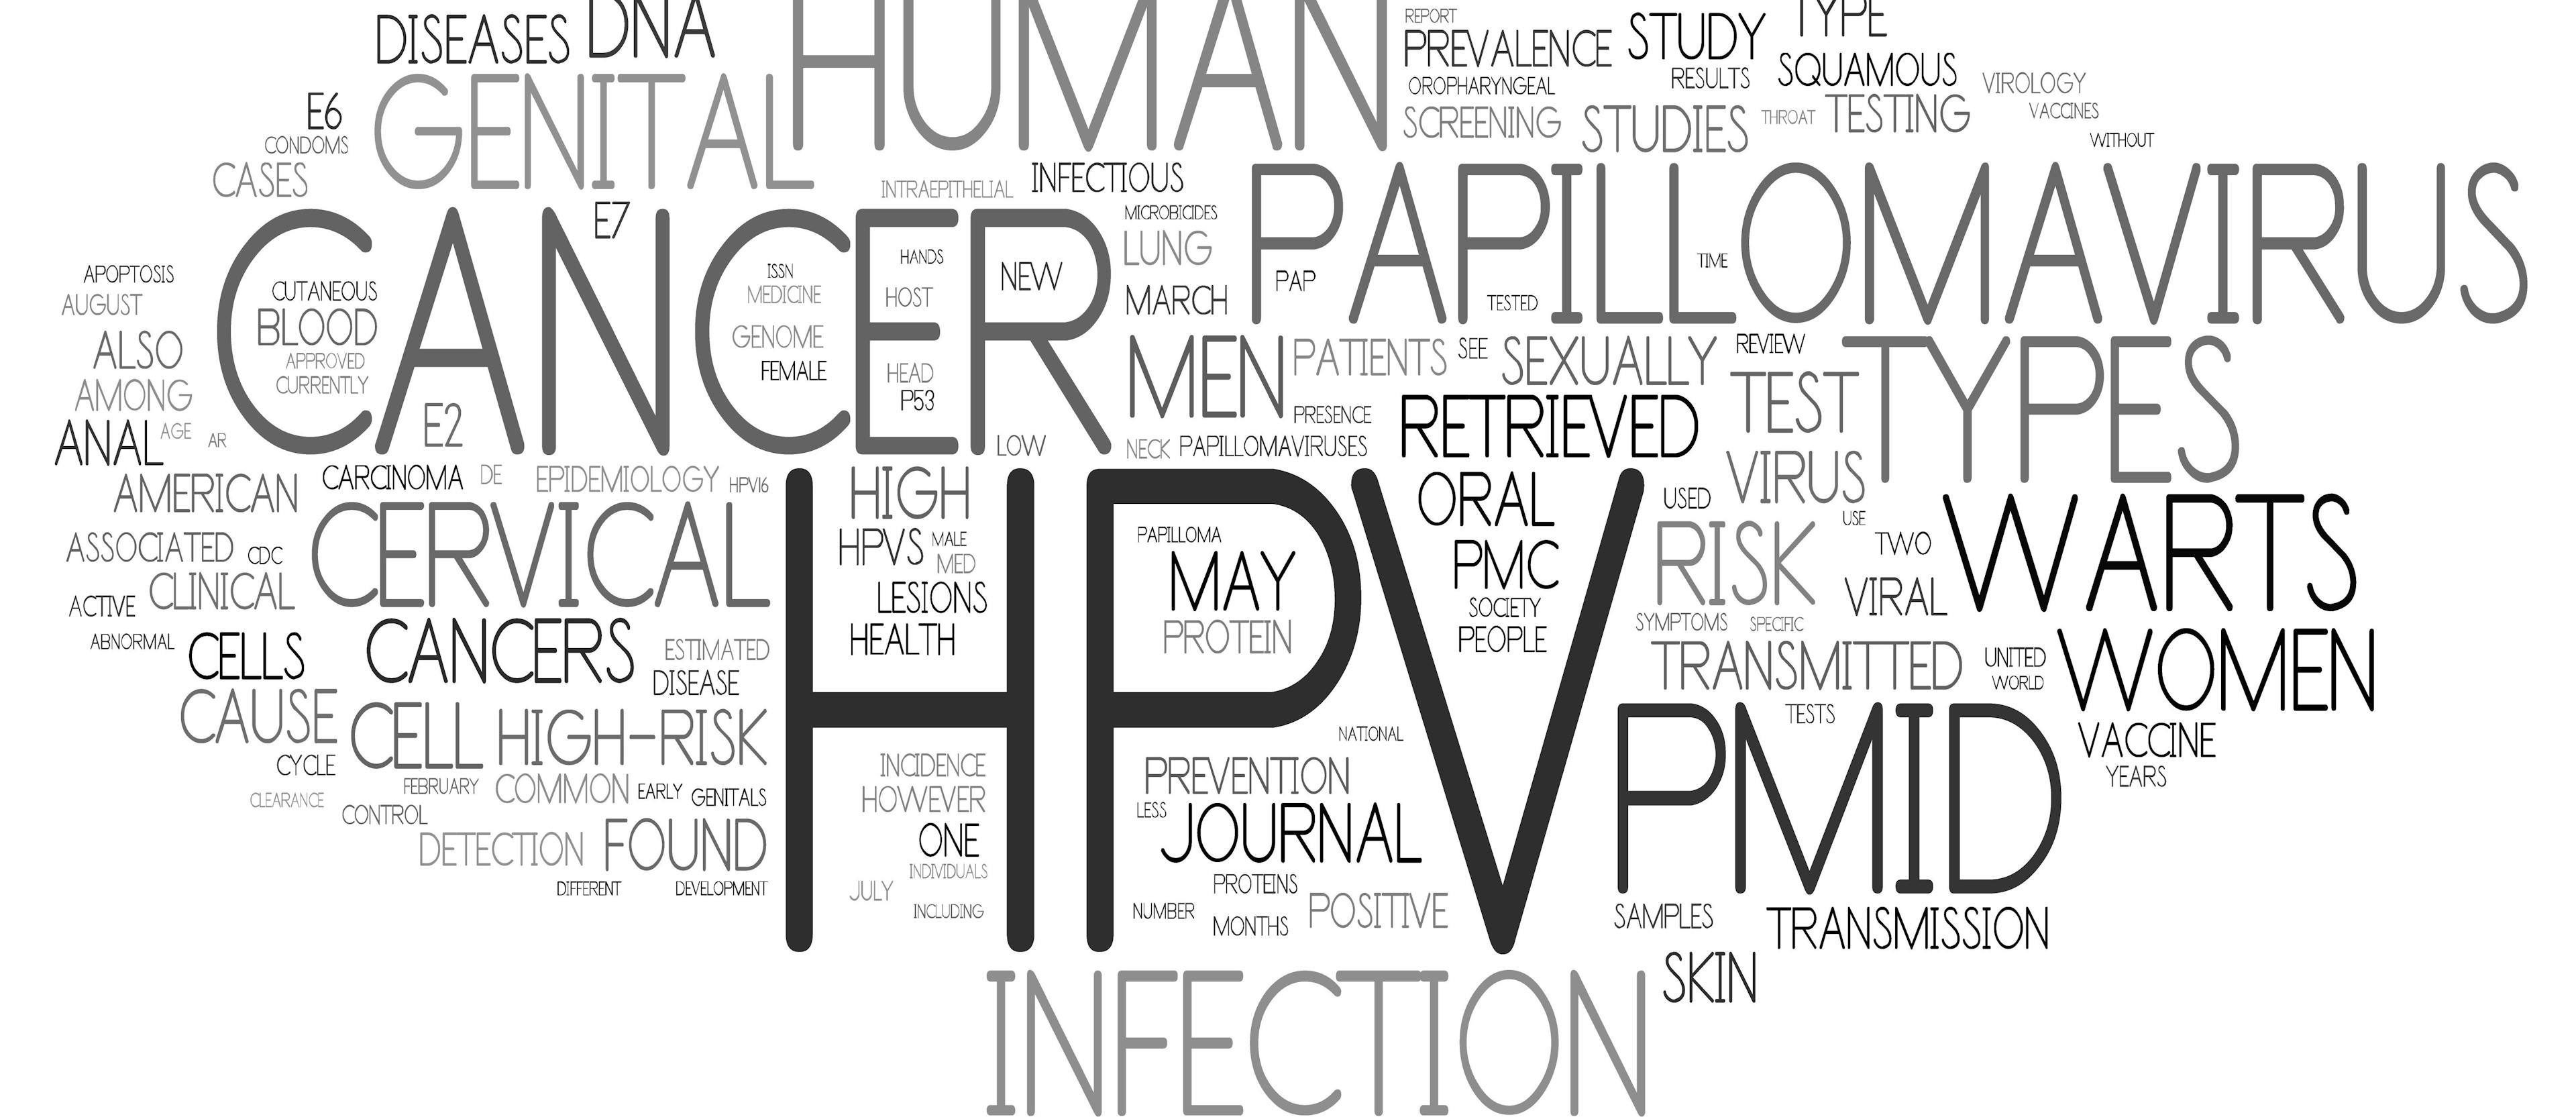 HPV Vaccine Reduces High-Risk Infections, But Are People Getting Vaccinated?